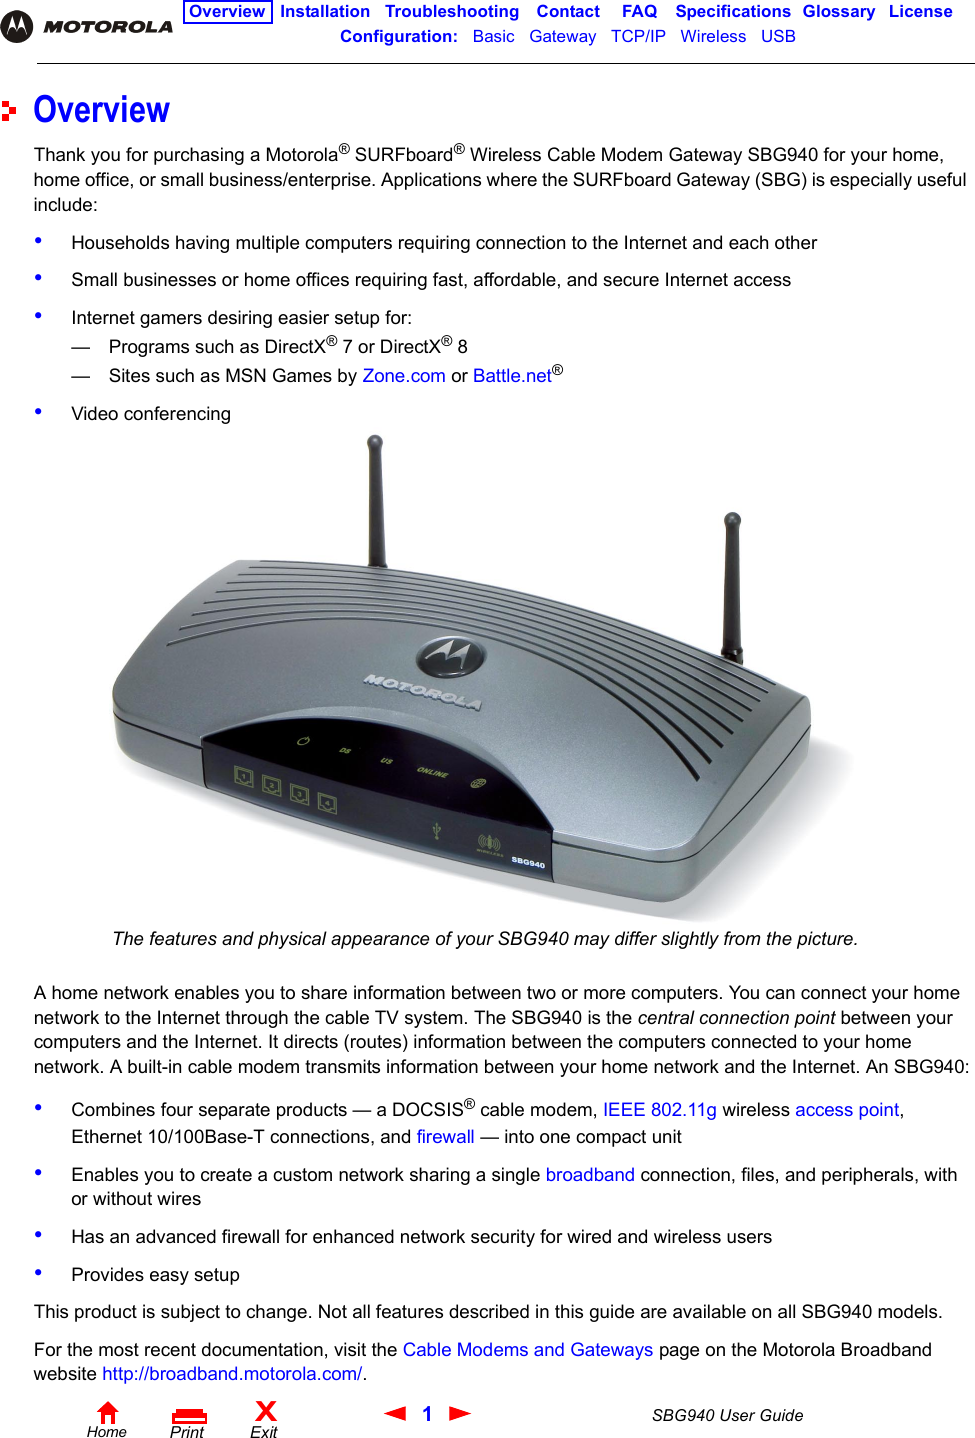 1SBG940 User GuideHomeXExitPrintOverview Installation Troubleshooting Contact FAQ Specifications Glossary LicenseConfiguration:   Basic   Gateway   TCP/IP   Wireless   USB   OverviewThank you for purchasing a Motorola® SURFboard® Wireless Cable Modem Gateway SBG940 for your home, home office, or small business/enterprise. Applications where the SURFboard Gateway (SBG) is especially useful include:•Households having multiple computers requiring connection to the Internet and each other•Small businesses or home offices requiring fast, affordable, and secure Internet access•Internet gamers desiring easier setup for:— Programs such as DirectX® 7 or DirectX® 8— Sites such as MSN Games by Zone.com or Battle.net®•Video conferencingA home network enables you to share information between two or more computers. You can connect your home network to the Internet through the cable TV system. The SBG940 is the central connection point between your computers and the Internet. It directs (routes) information between the computers connected to your home network. A built-in cable modem transmits information between your home network and the Internet. An SBG940:•Combines four separate products — a DOCSIS® cable modem, IEEE 802.11g wireless access point, Ethernet 10/100Base-T connections, and firewall — into one compact unit •Enables you to create a custom network sharing a single broadband connection, files, and peripherals, with or without wires•Has an advanced firewall for enhanced network security for wired and wireless users•Provides easy setupThis product is subject to change. Not all features described in this guide are available on all SBG940 models. For the most recent documentation, visit the Cable Modems and Gateways page on the Motorola Broadband website http://broadband.motorola.com/.The features and physical appearance of your SBG940 may differ slightly from the picture.